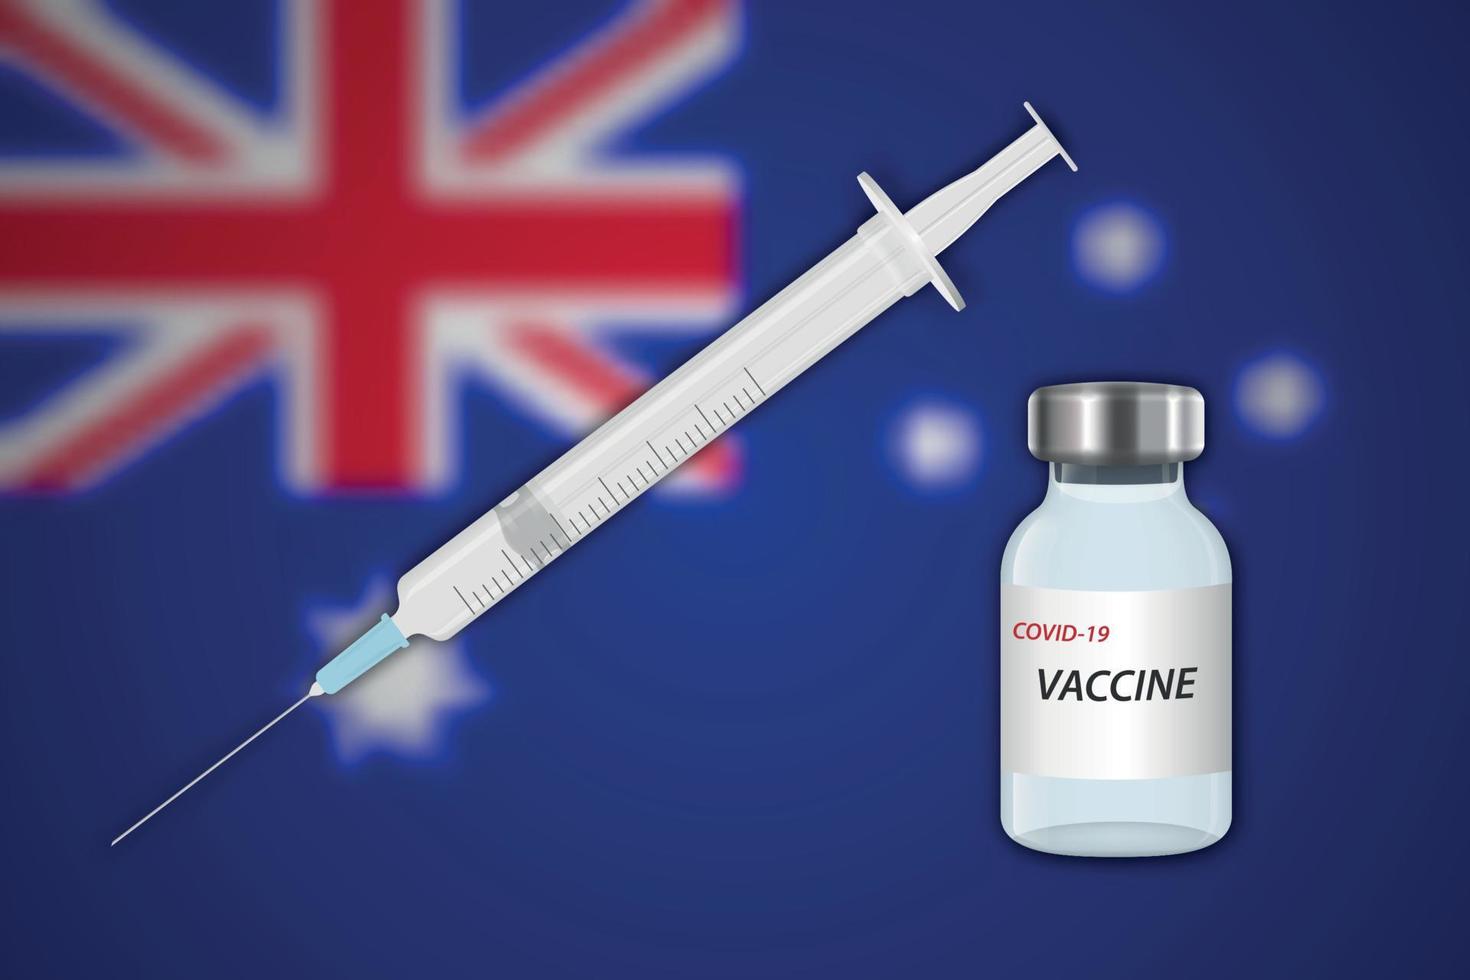 Syringe and vaccine vial on blur background with Australia flag vector